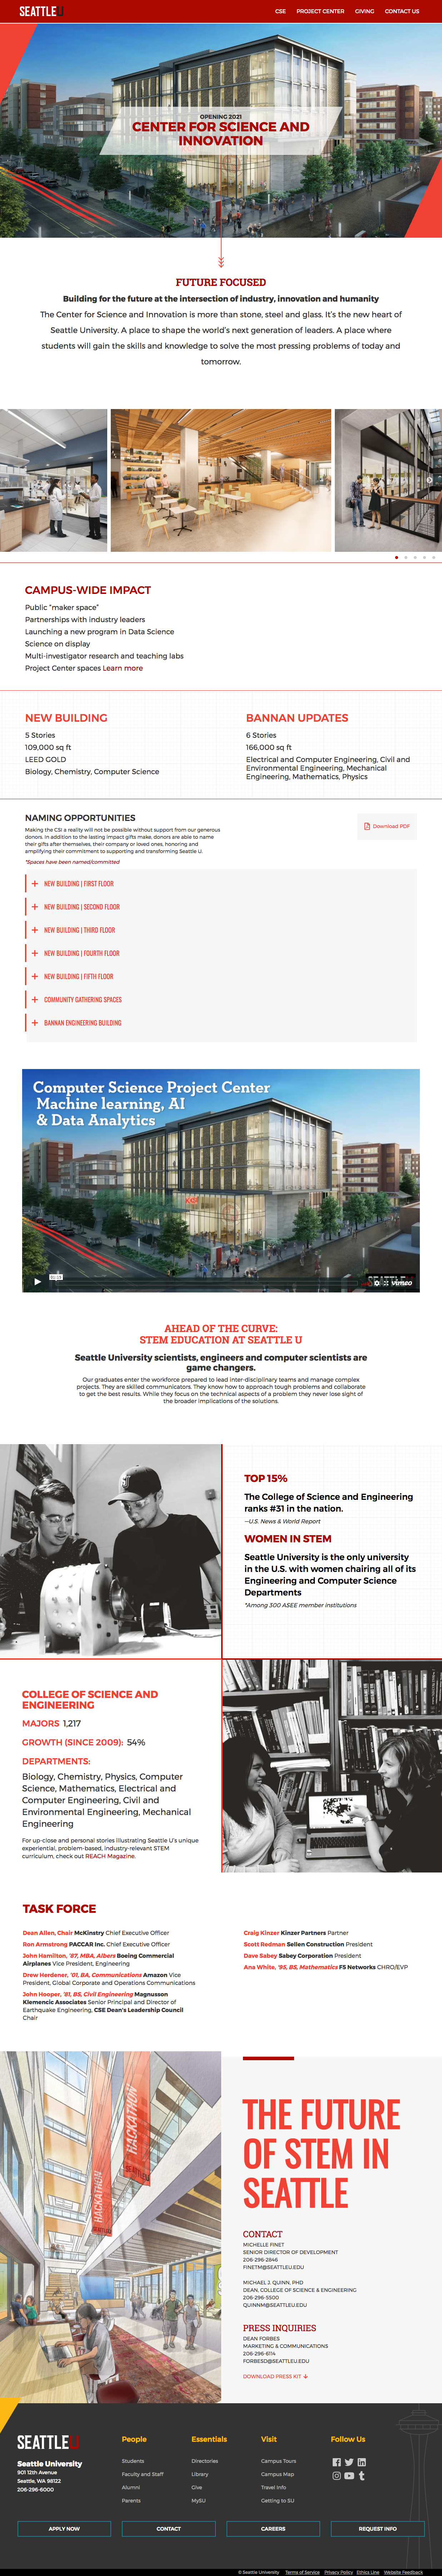 SU Center for Science and Innovation Landing Page